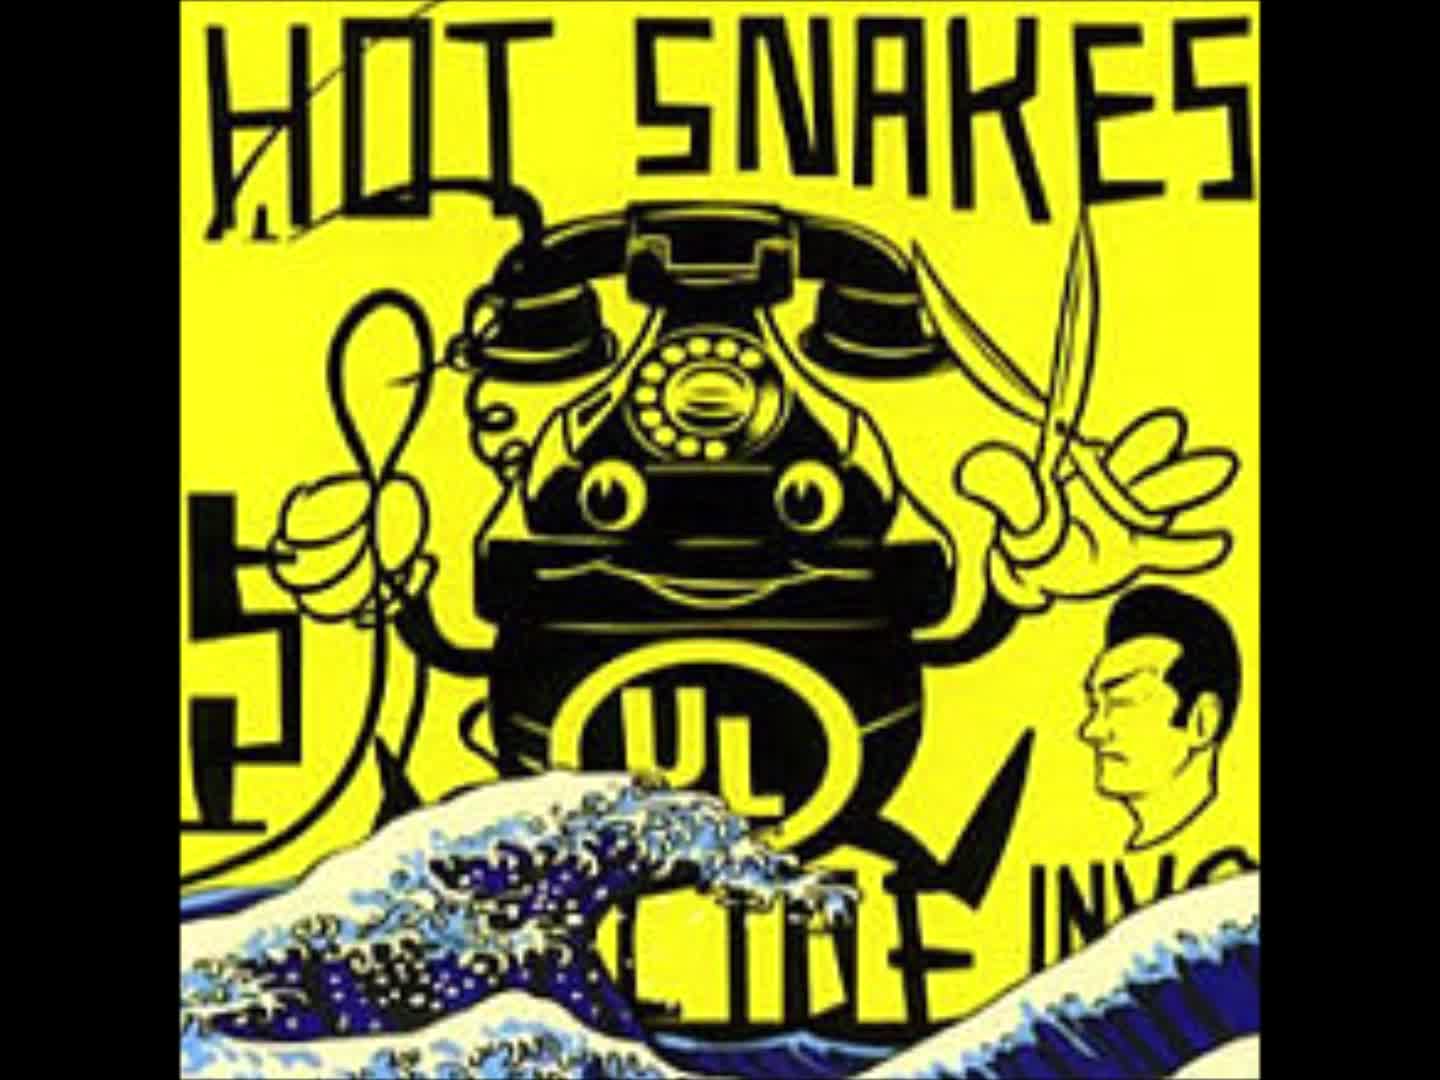 Hot Snakes - Paid in Cigarettes